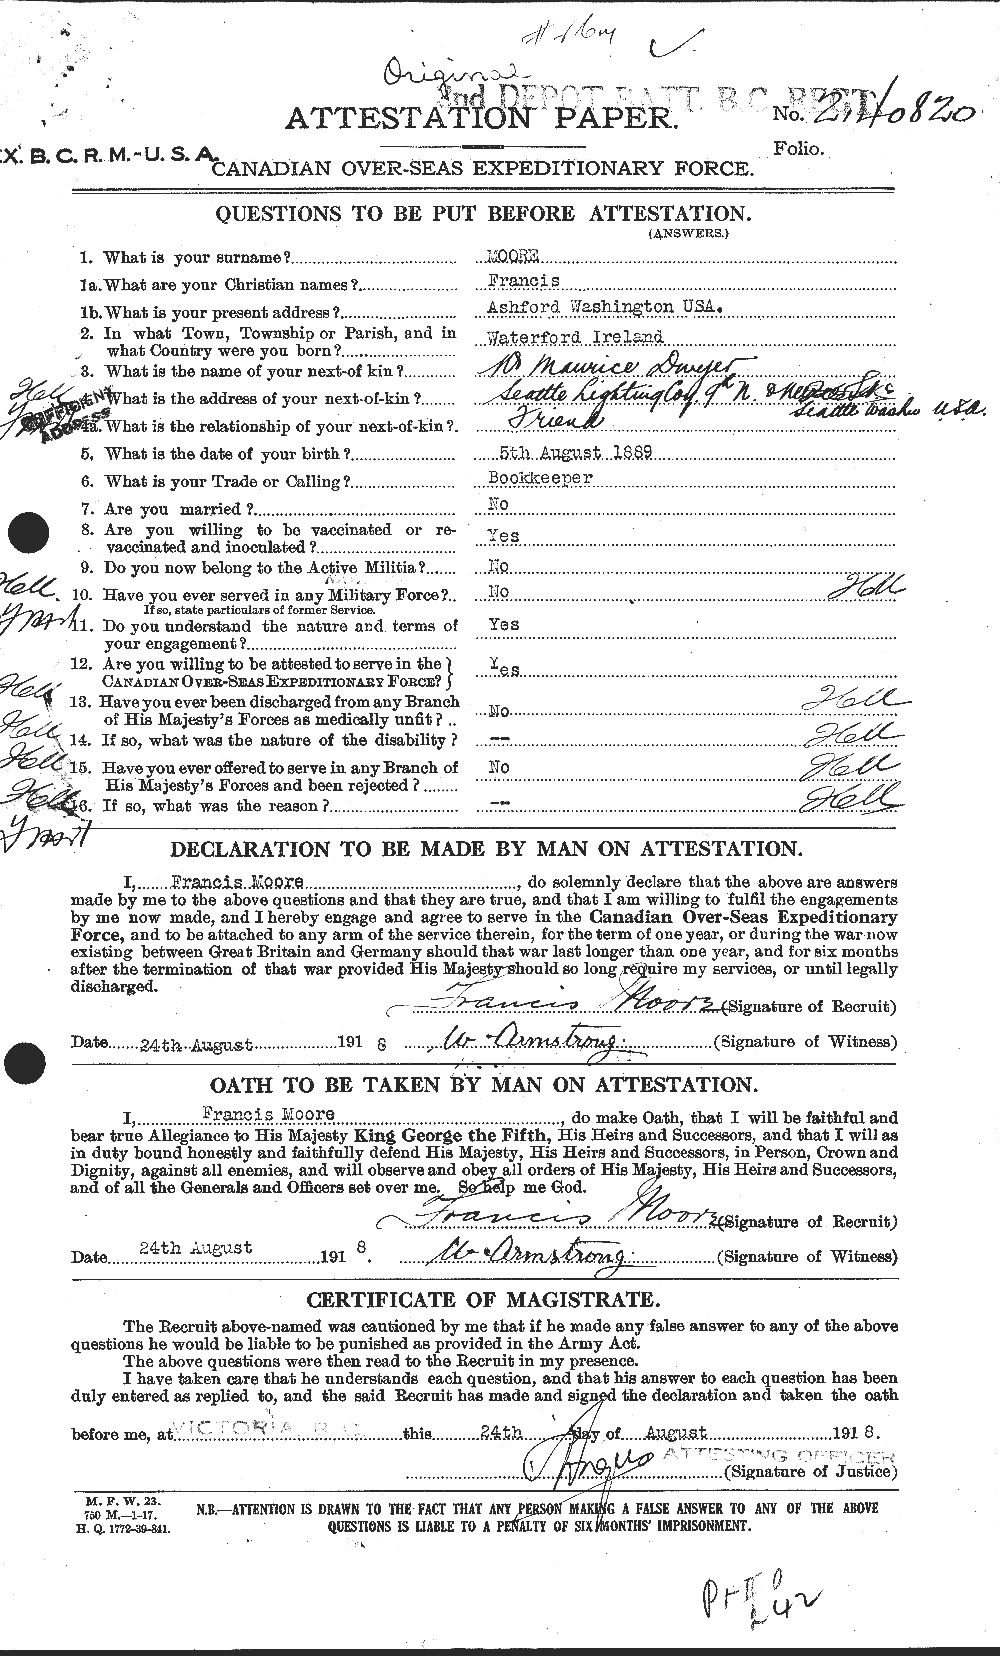 Personnel Records of the First World War - CEF 509613a